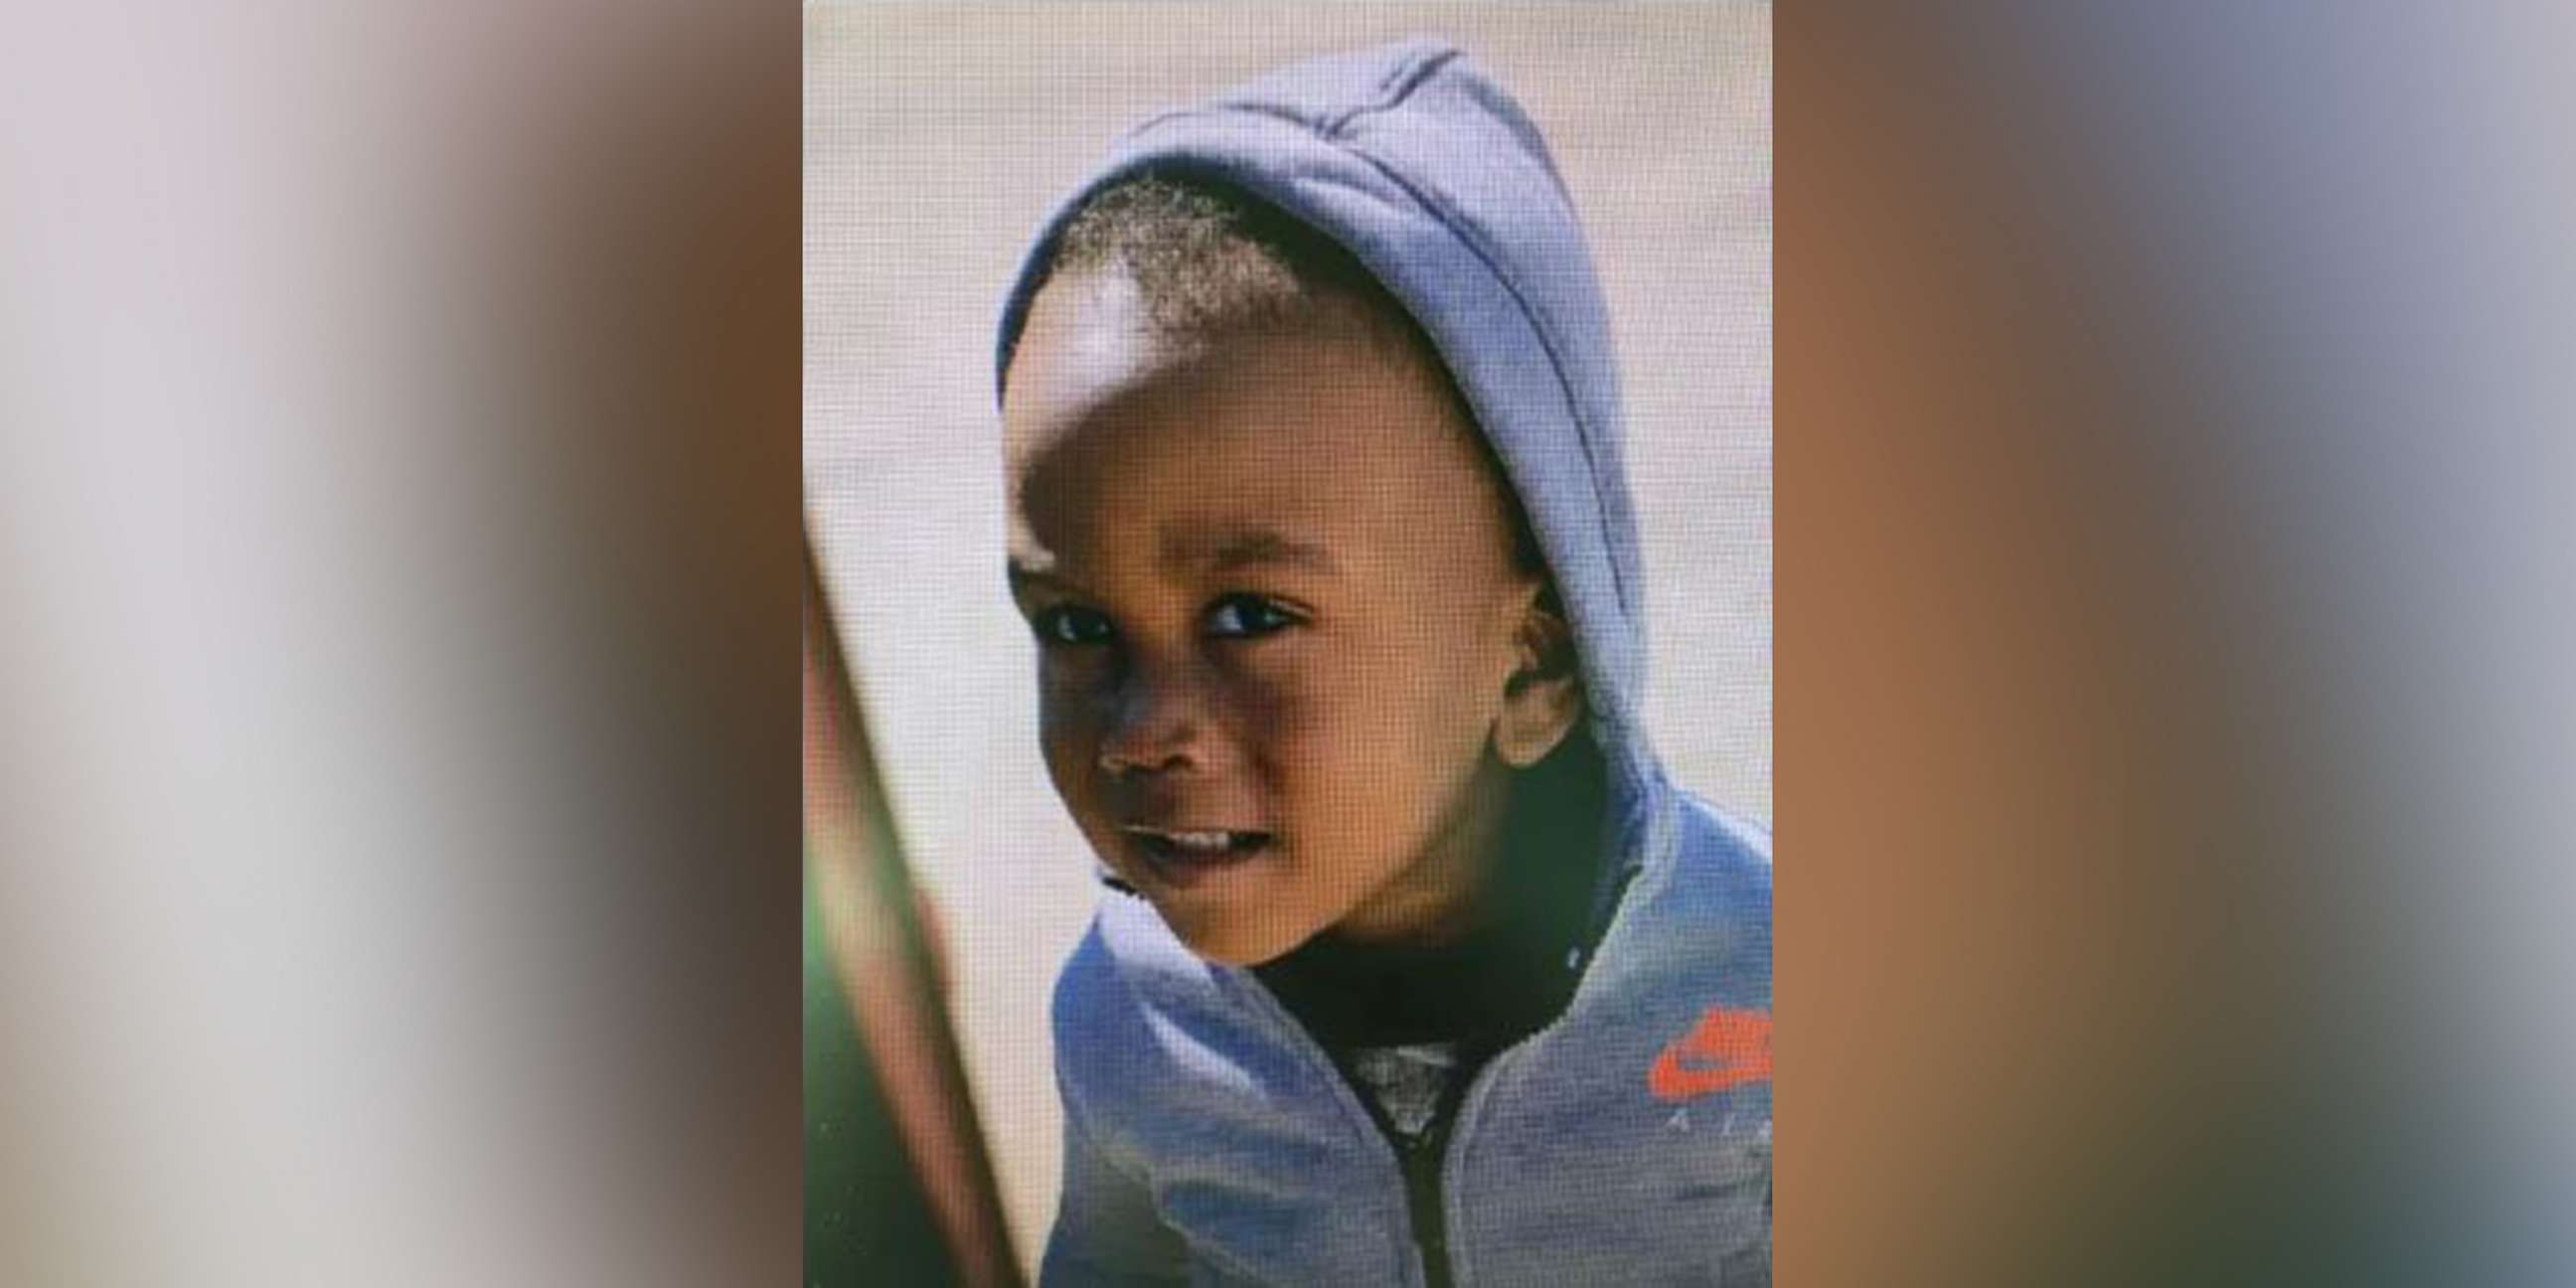 PHOTO: One-year-old Rory Norman, was killed early Jan. 5, 2020, when a man armed with a rifle fired into a bedroom where he was sleeping, in Dallas. Police are looking for more information.